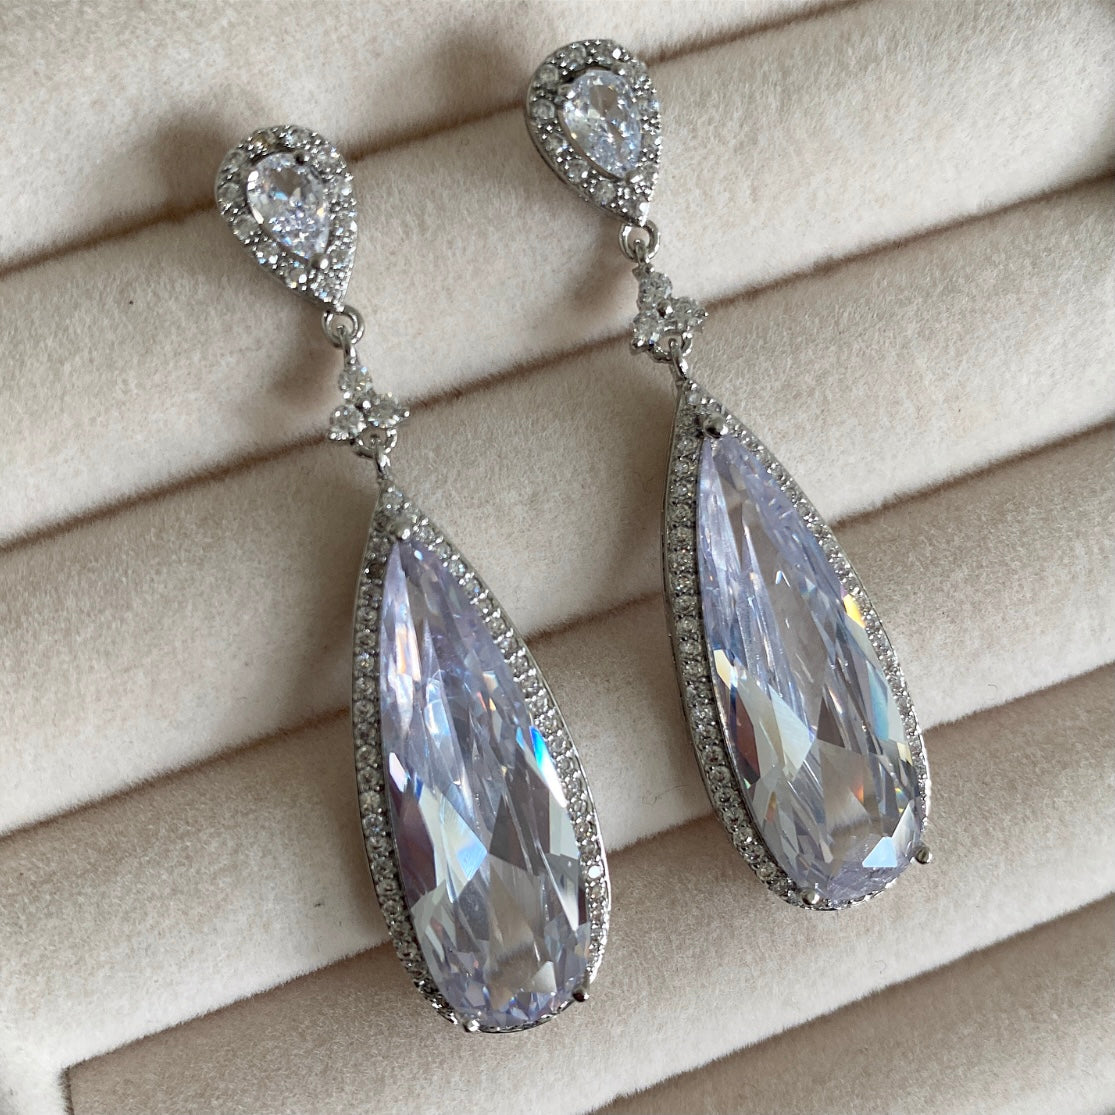 These Reva Crystal Drop Earrings feature a sleek and sophisticated design with a dazzling crystal drop. Crafted with premium quality cz crystals, these earrings sparkle and glimmer in any light, making them the perfect accessory for any occasion. Long-lasting and resistant, these earrings are sure to be an eye-catching addition to your look. Earring drop 5.5cm